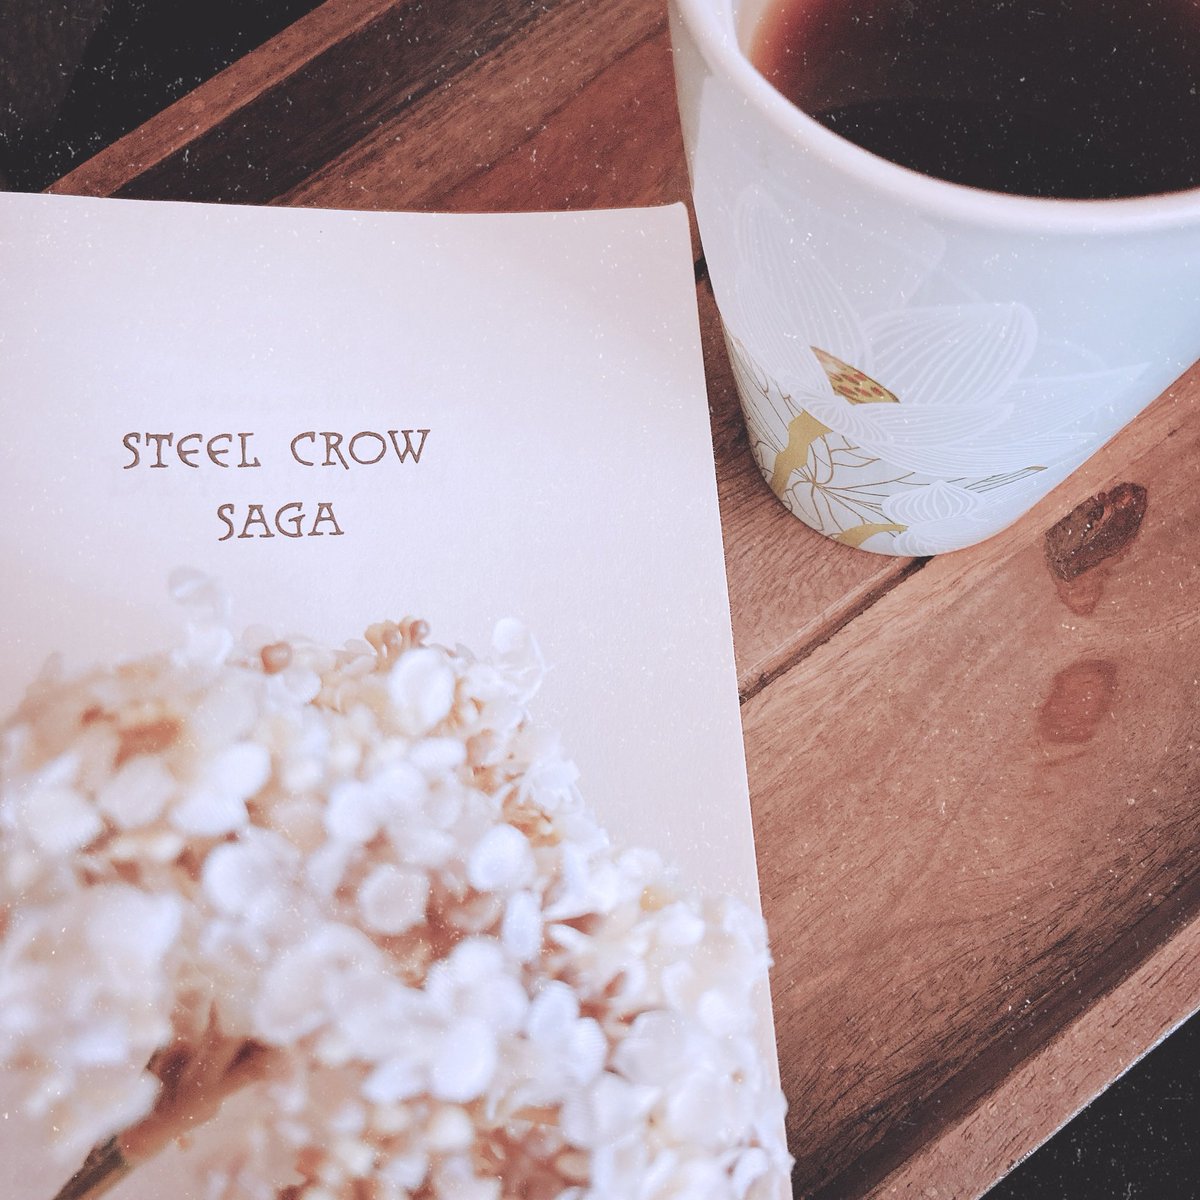 Book #5 for  #asianreadathon (which just so happens to be my 1st for  #tometopple): Steel Crow Saga, by Paul Krueger.  I’m glad I finally read this book I’ve meant to read for almost 2 years, because I loved it exactly as much as I knew I would.